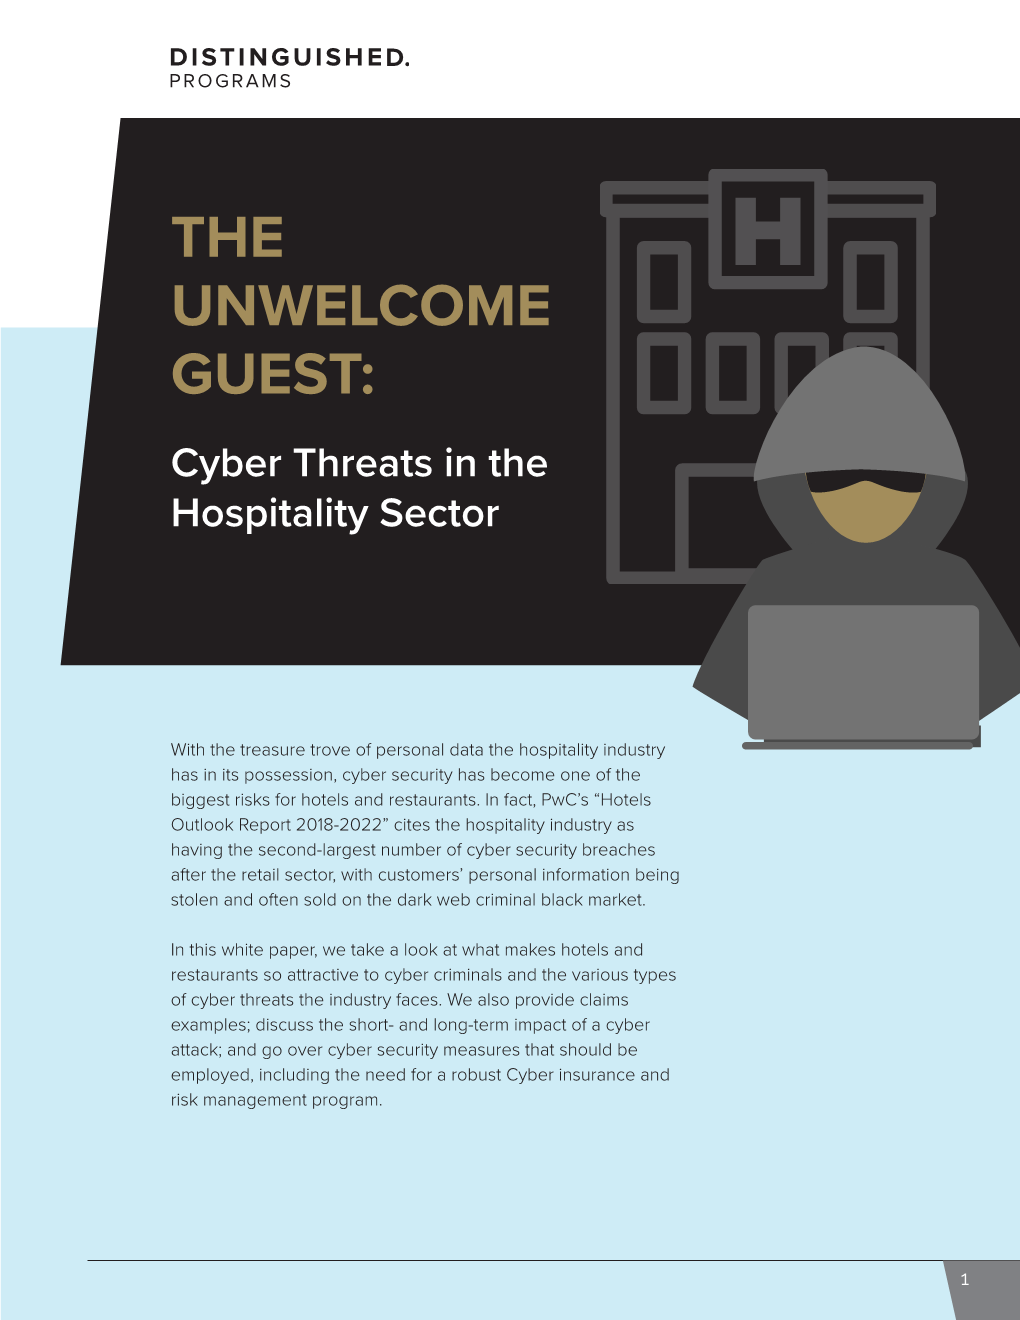 THE UNWELCOME GUEST: Cyber Threats in the Hospitality Sector